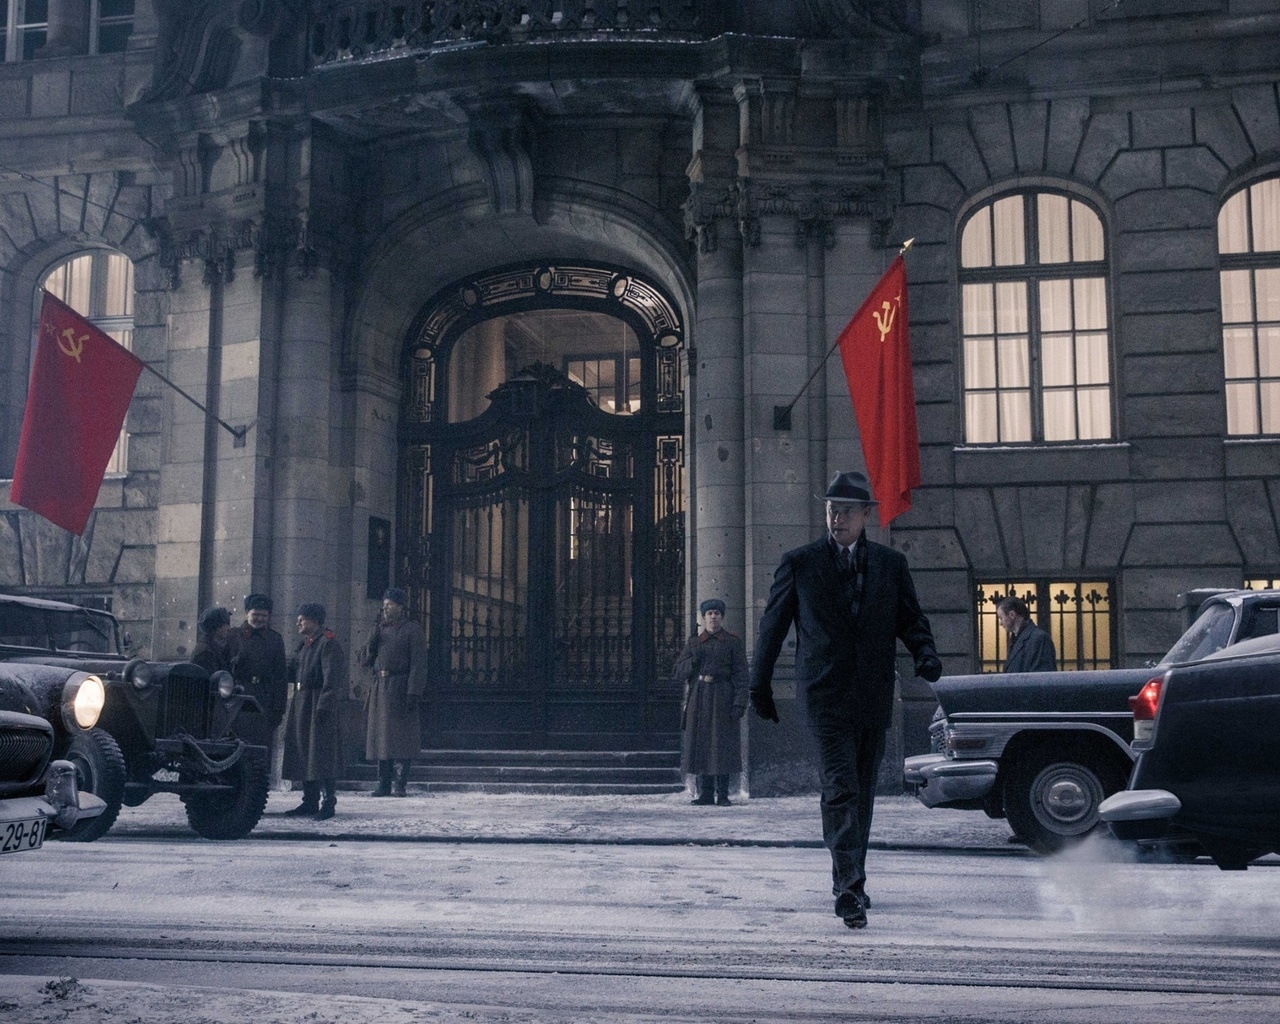 Bridge of Spies for 1280 x 1024 resolution